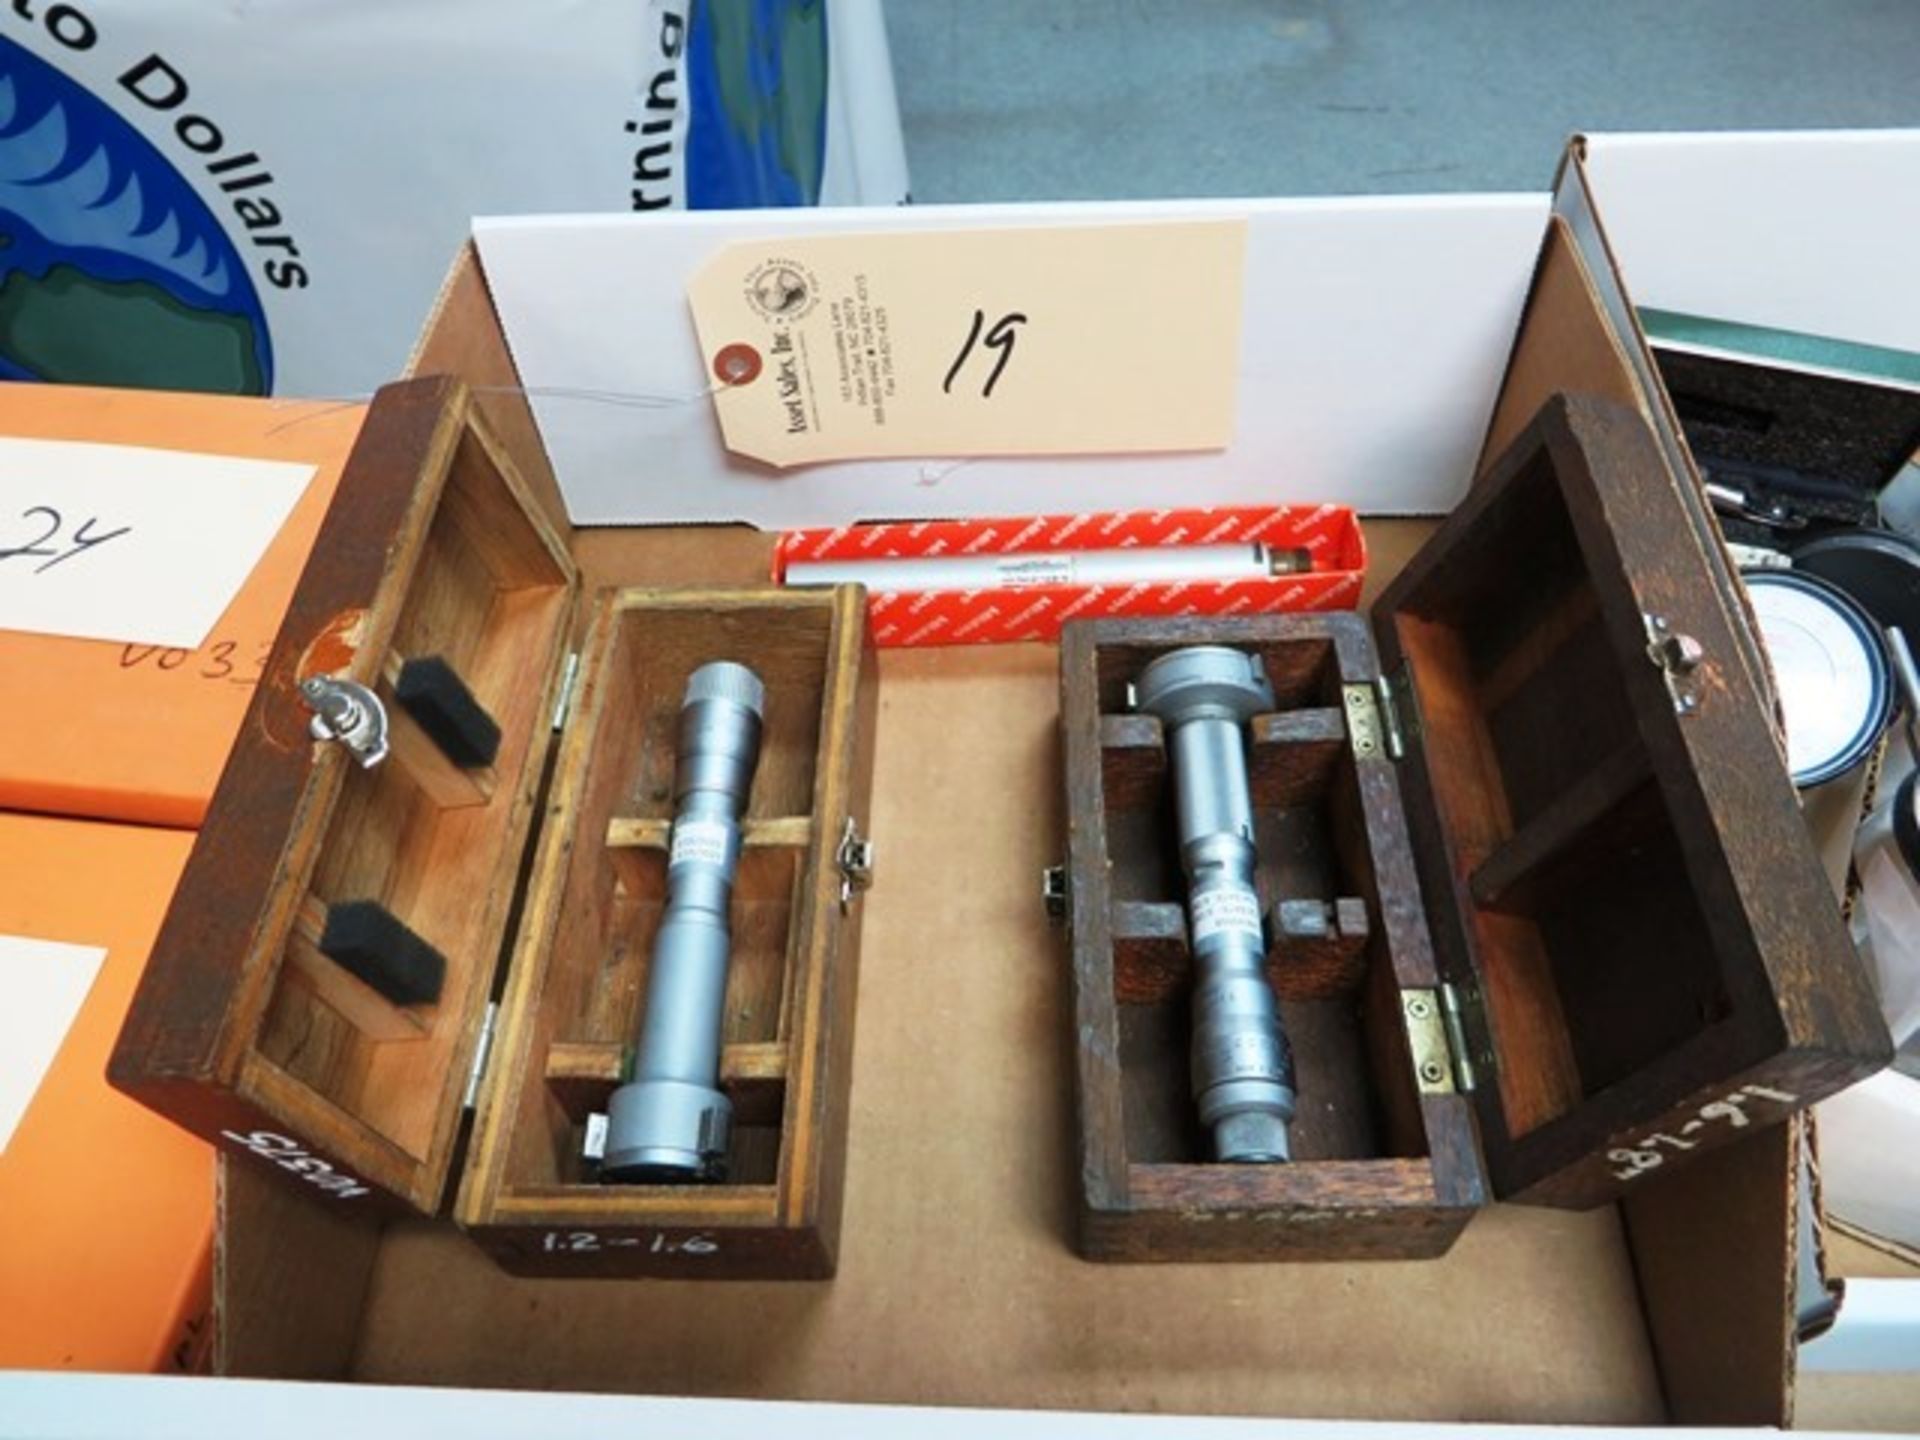 (2) Mitutoyo Hole Test Micrometers